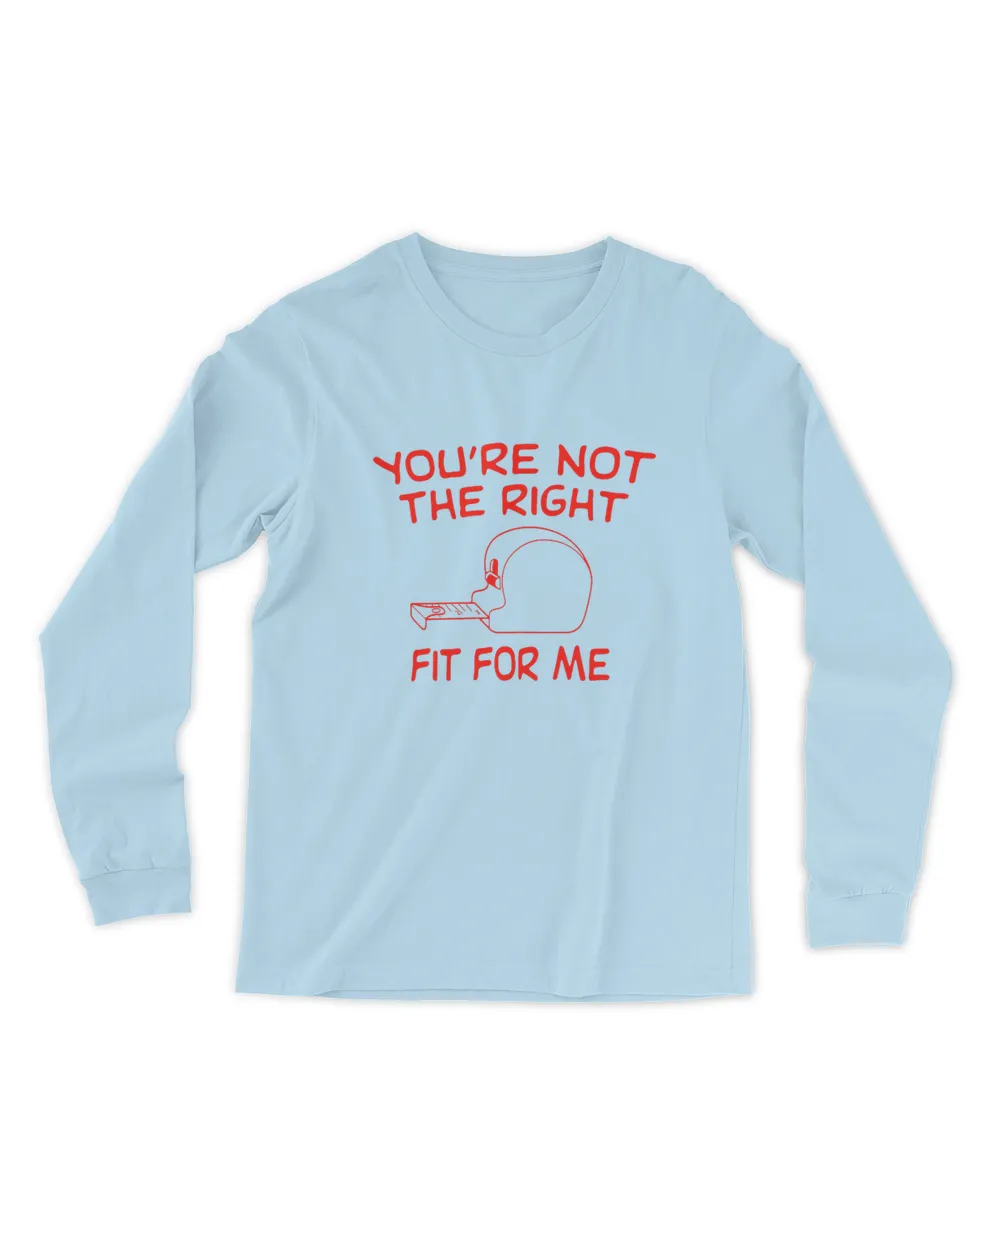 You're Not The Right Fit For Me Tee Shirt Men's Long Sleeved T-Shirt light-blue 